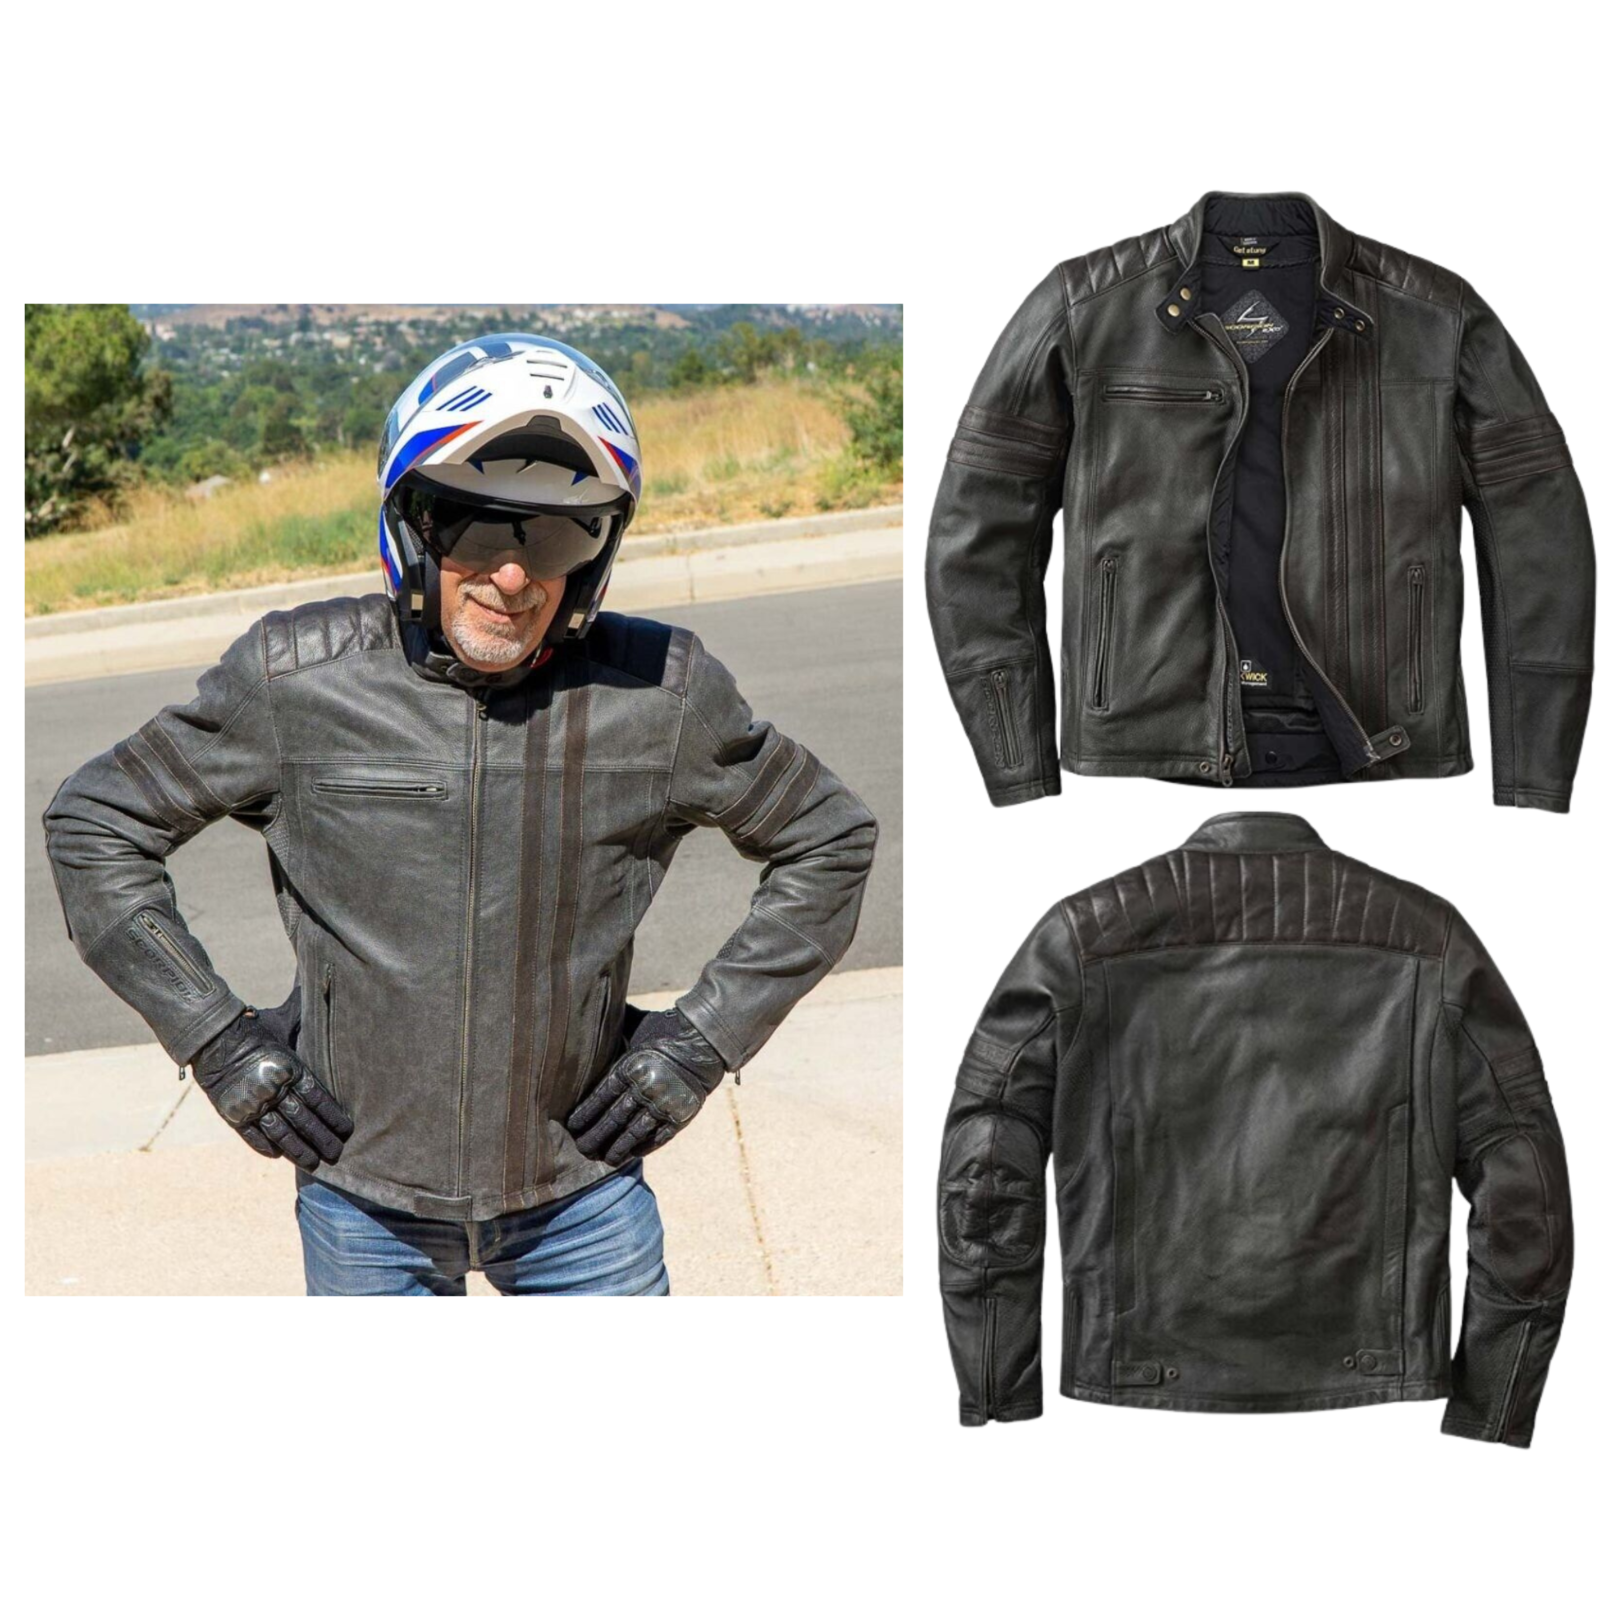 Primary image for Scorpion Black Biker Armored Padded Motorcycle Leather Jacket For Men's